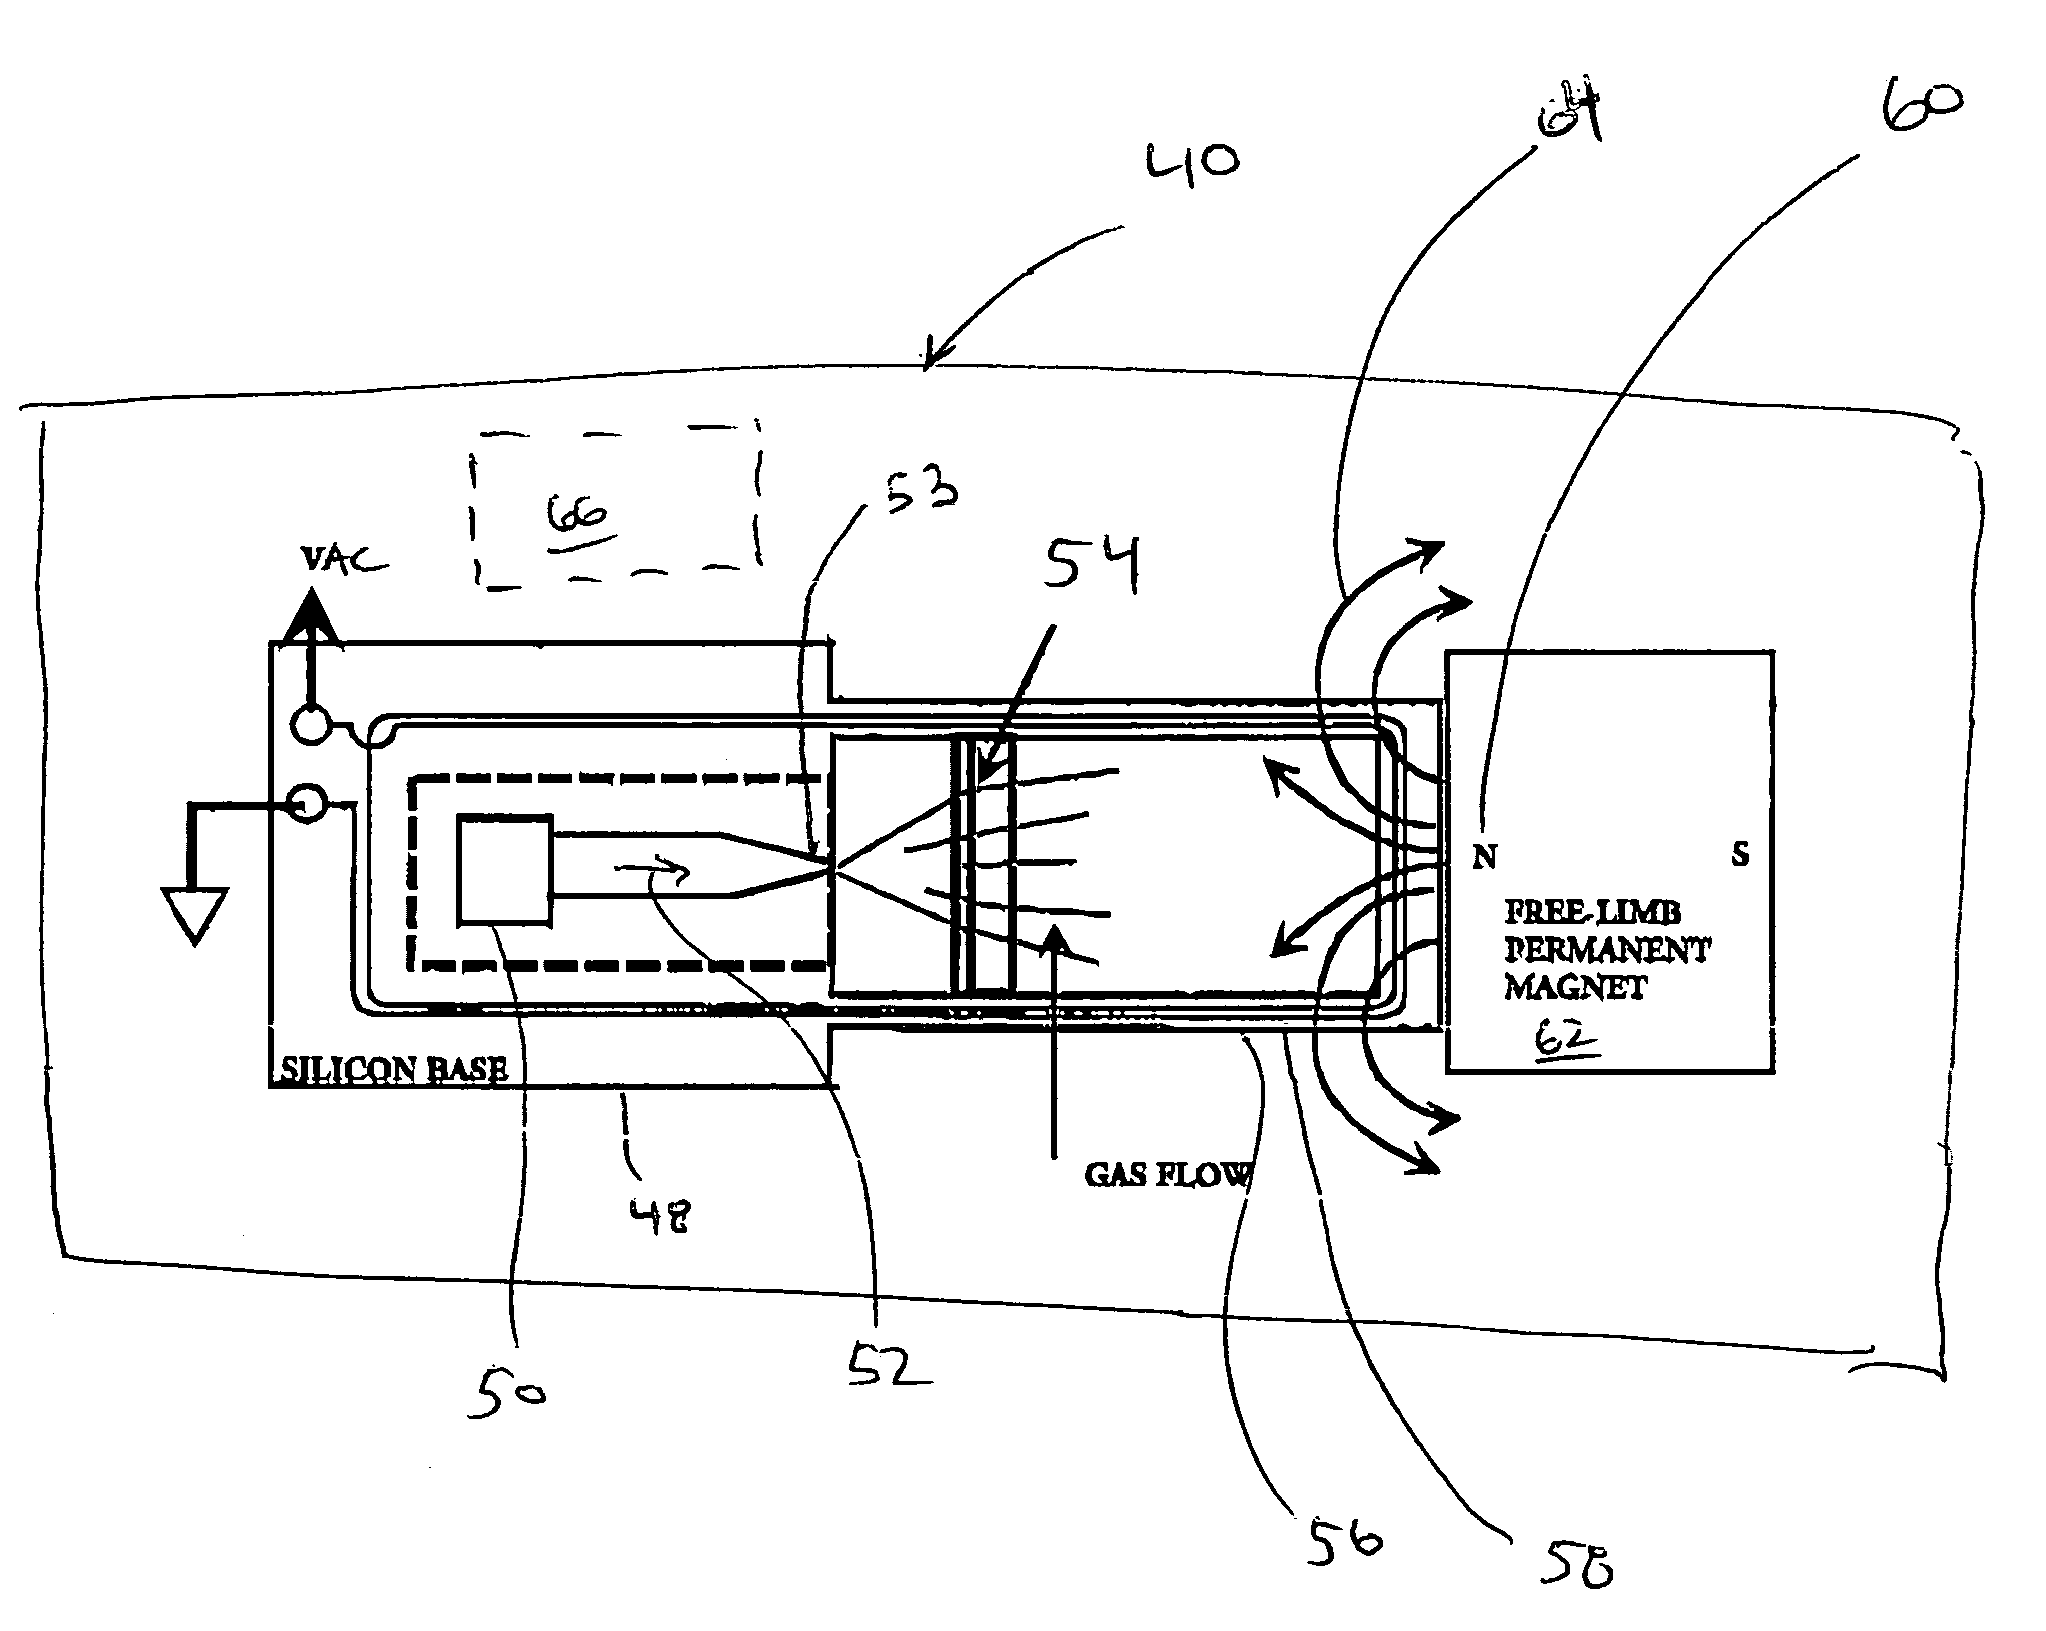 Pressurized gas to electrical energy conversion for low-power field devices